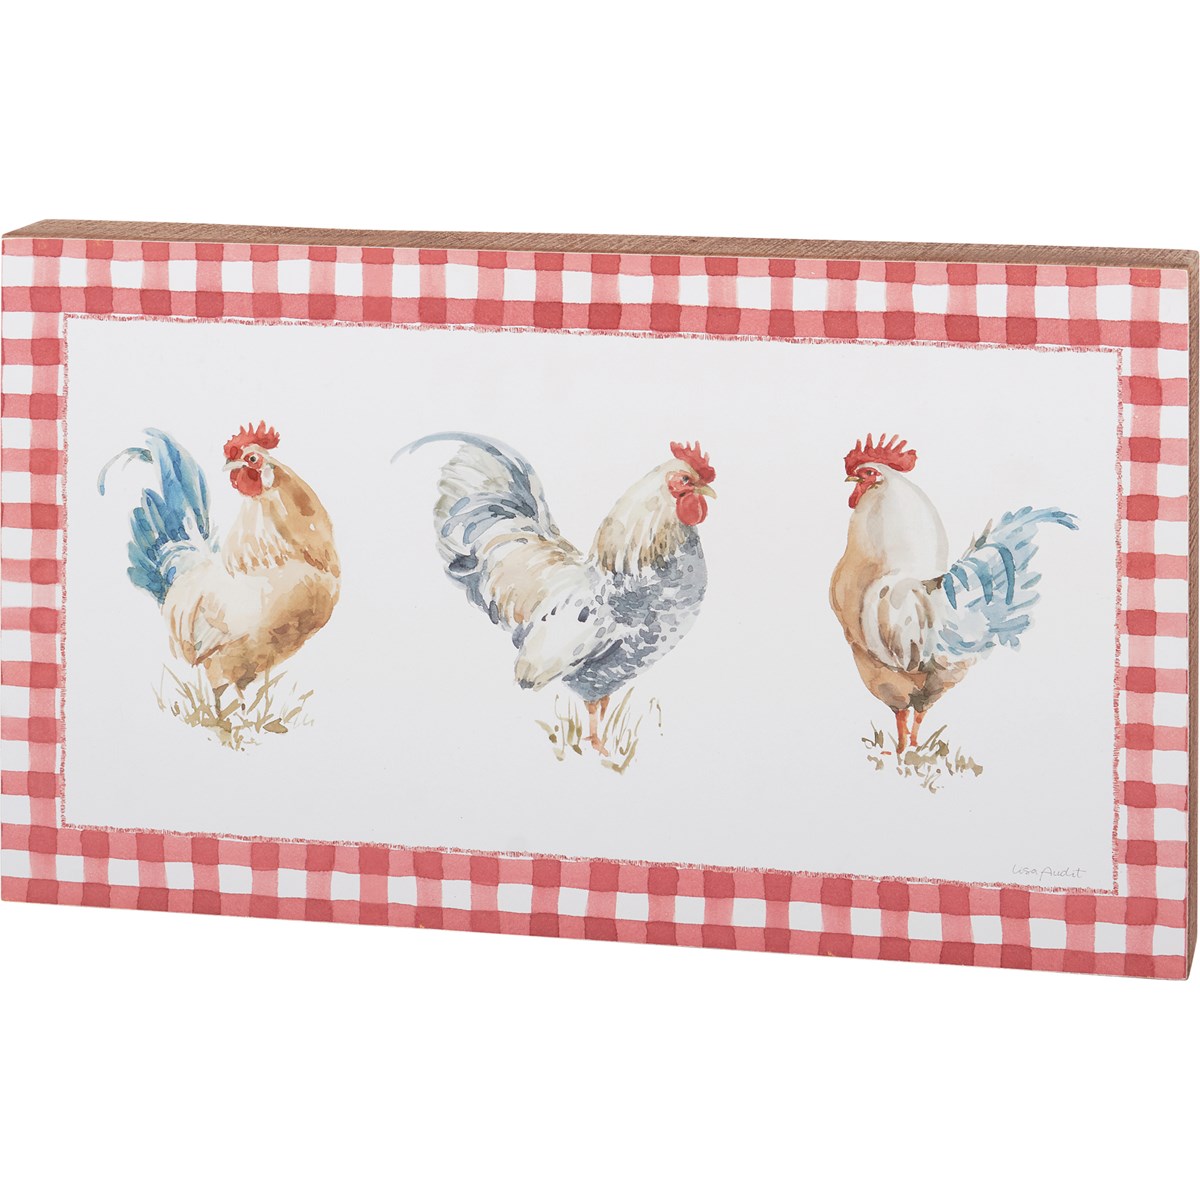 Rooster Trio Box Sign - Wood, Paper